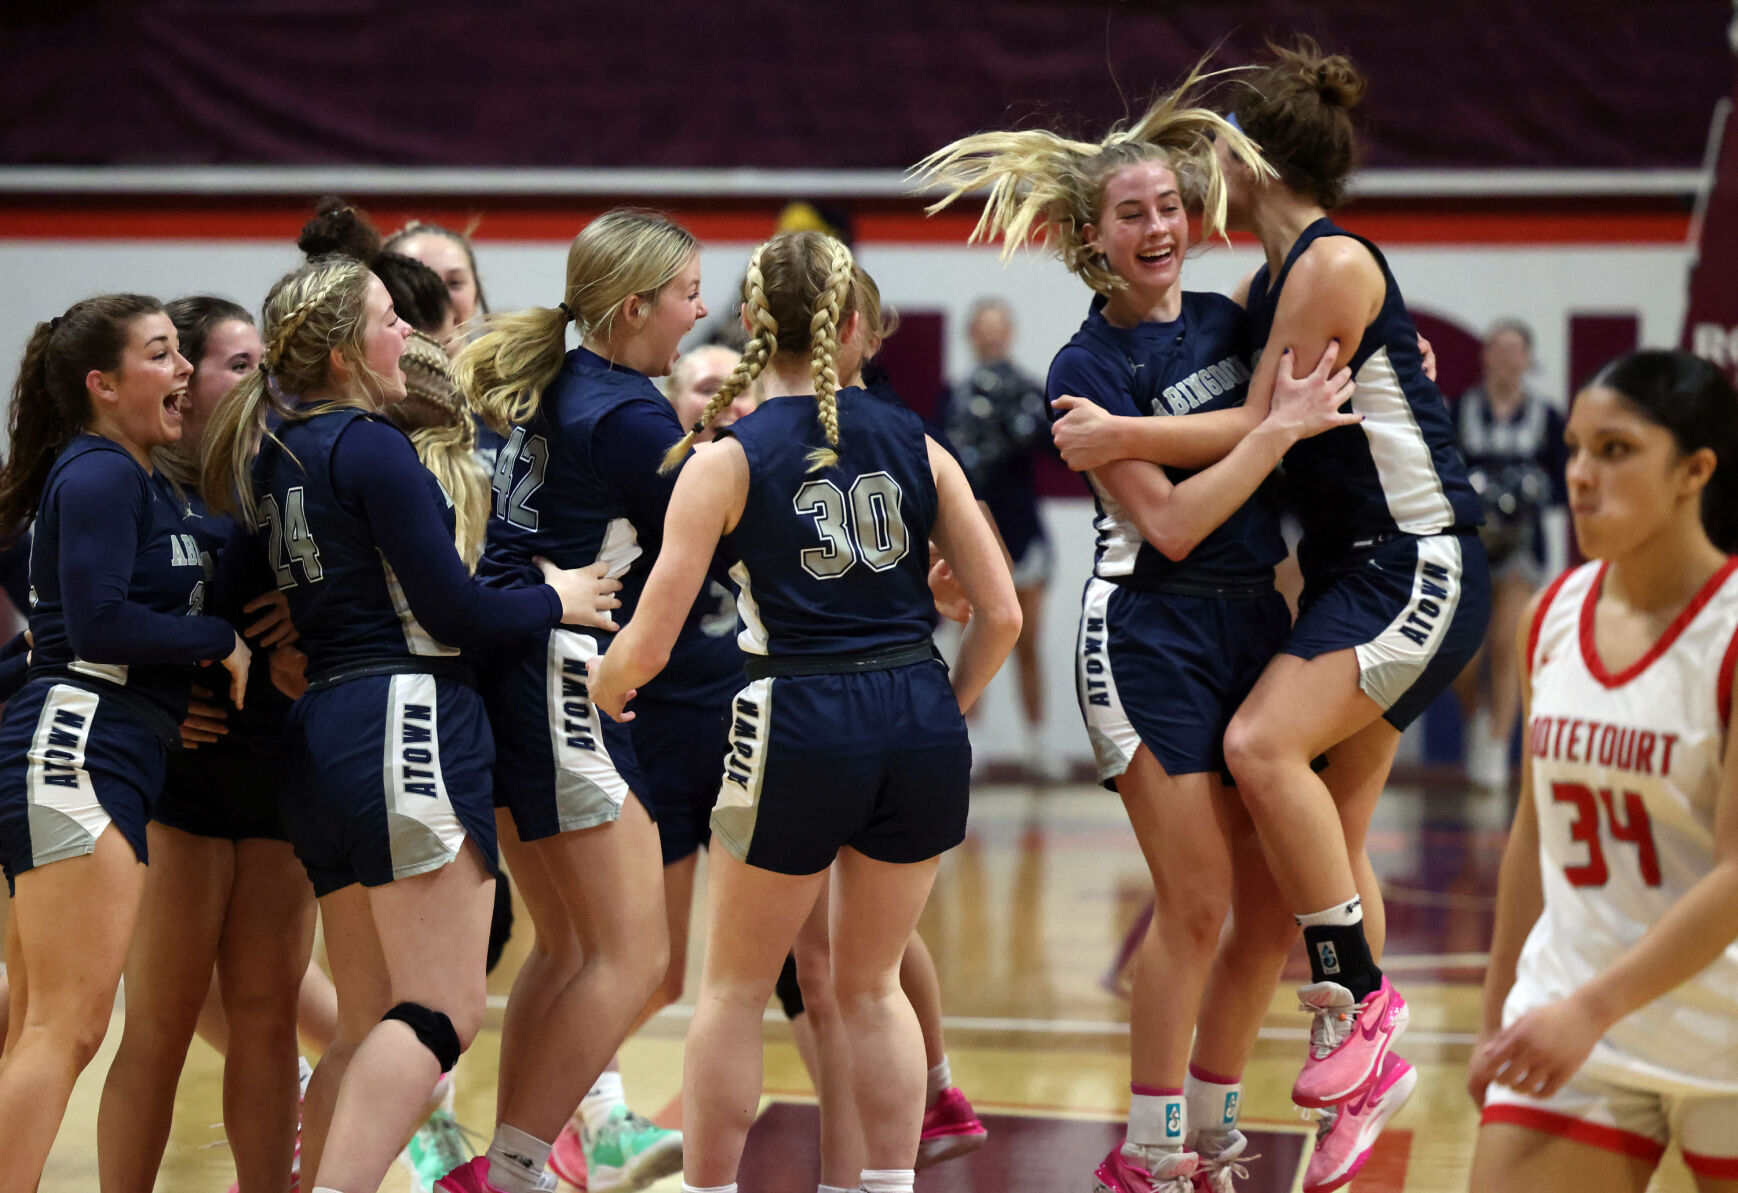 Abingdon Falcons Beat Lord Botetourt 52-41 in Region 3D Semifinal – Brenna Green’s 12 Points Key to Victory